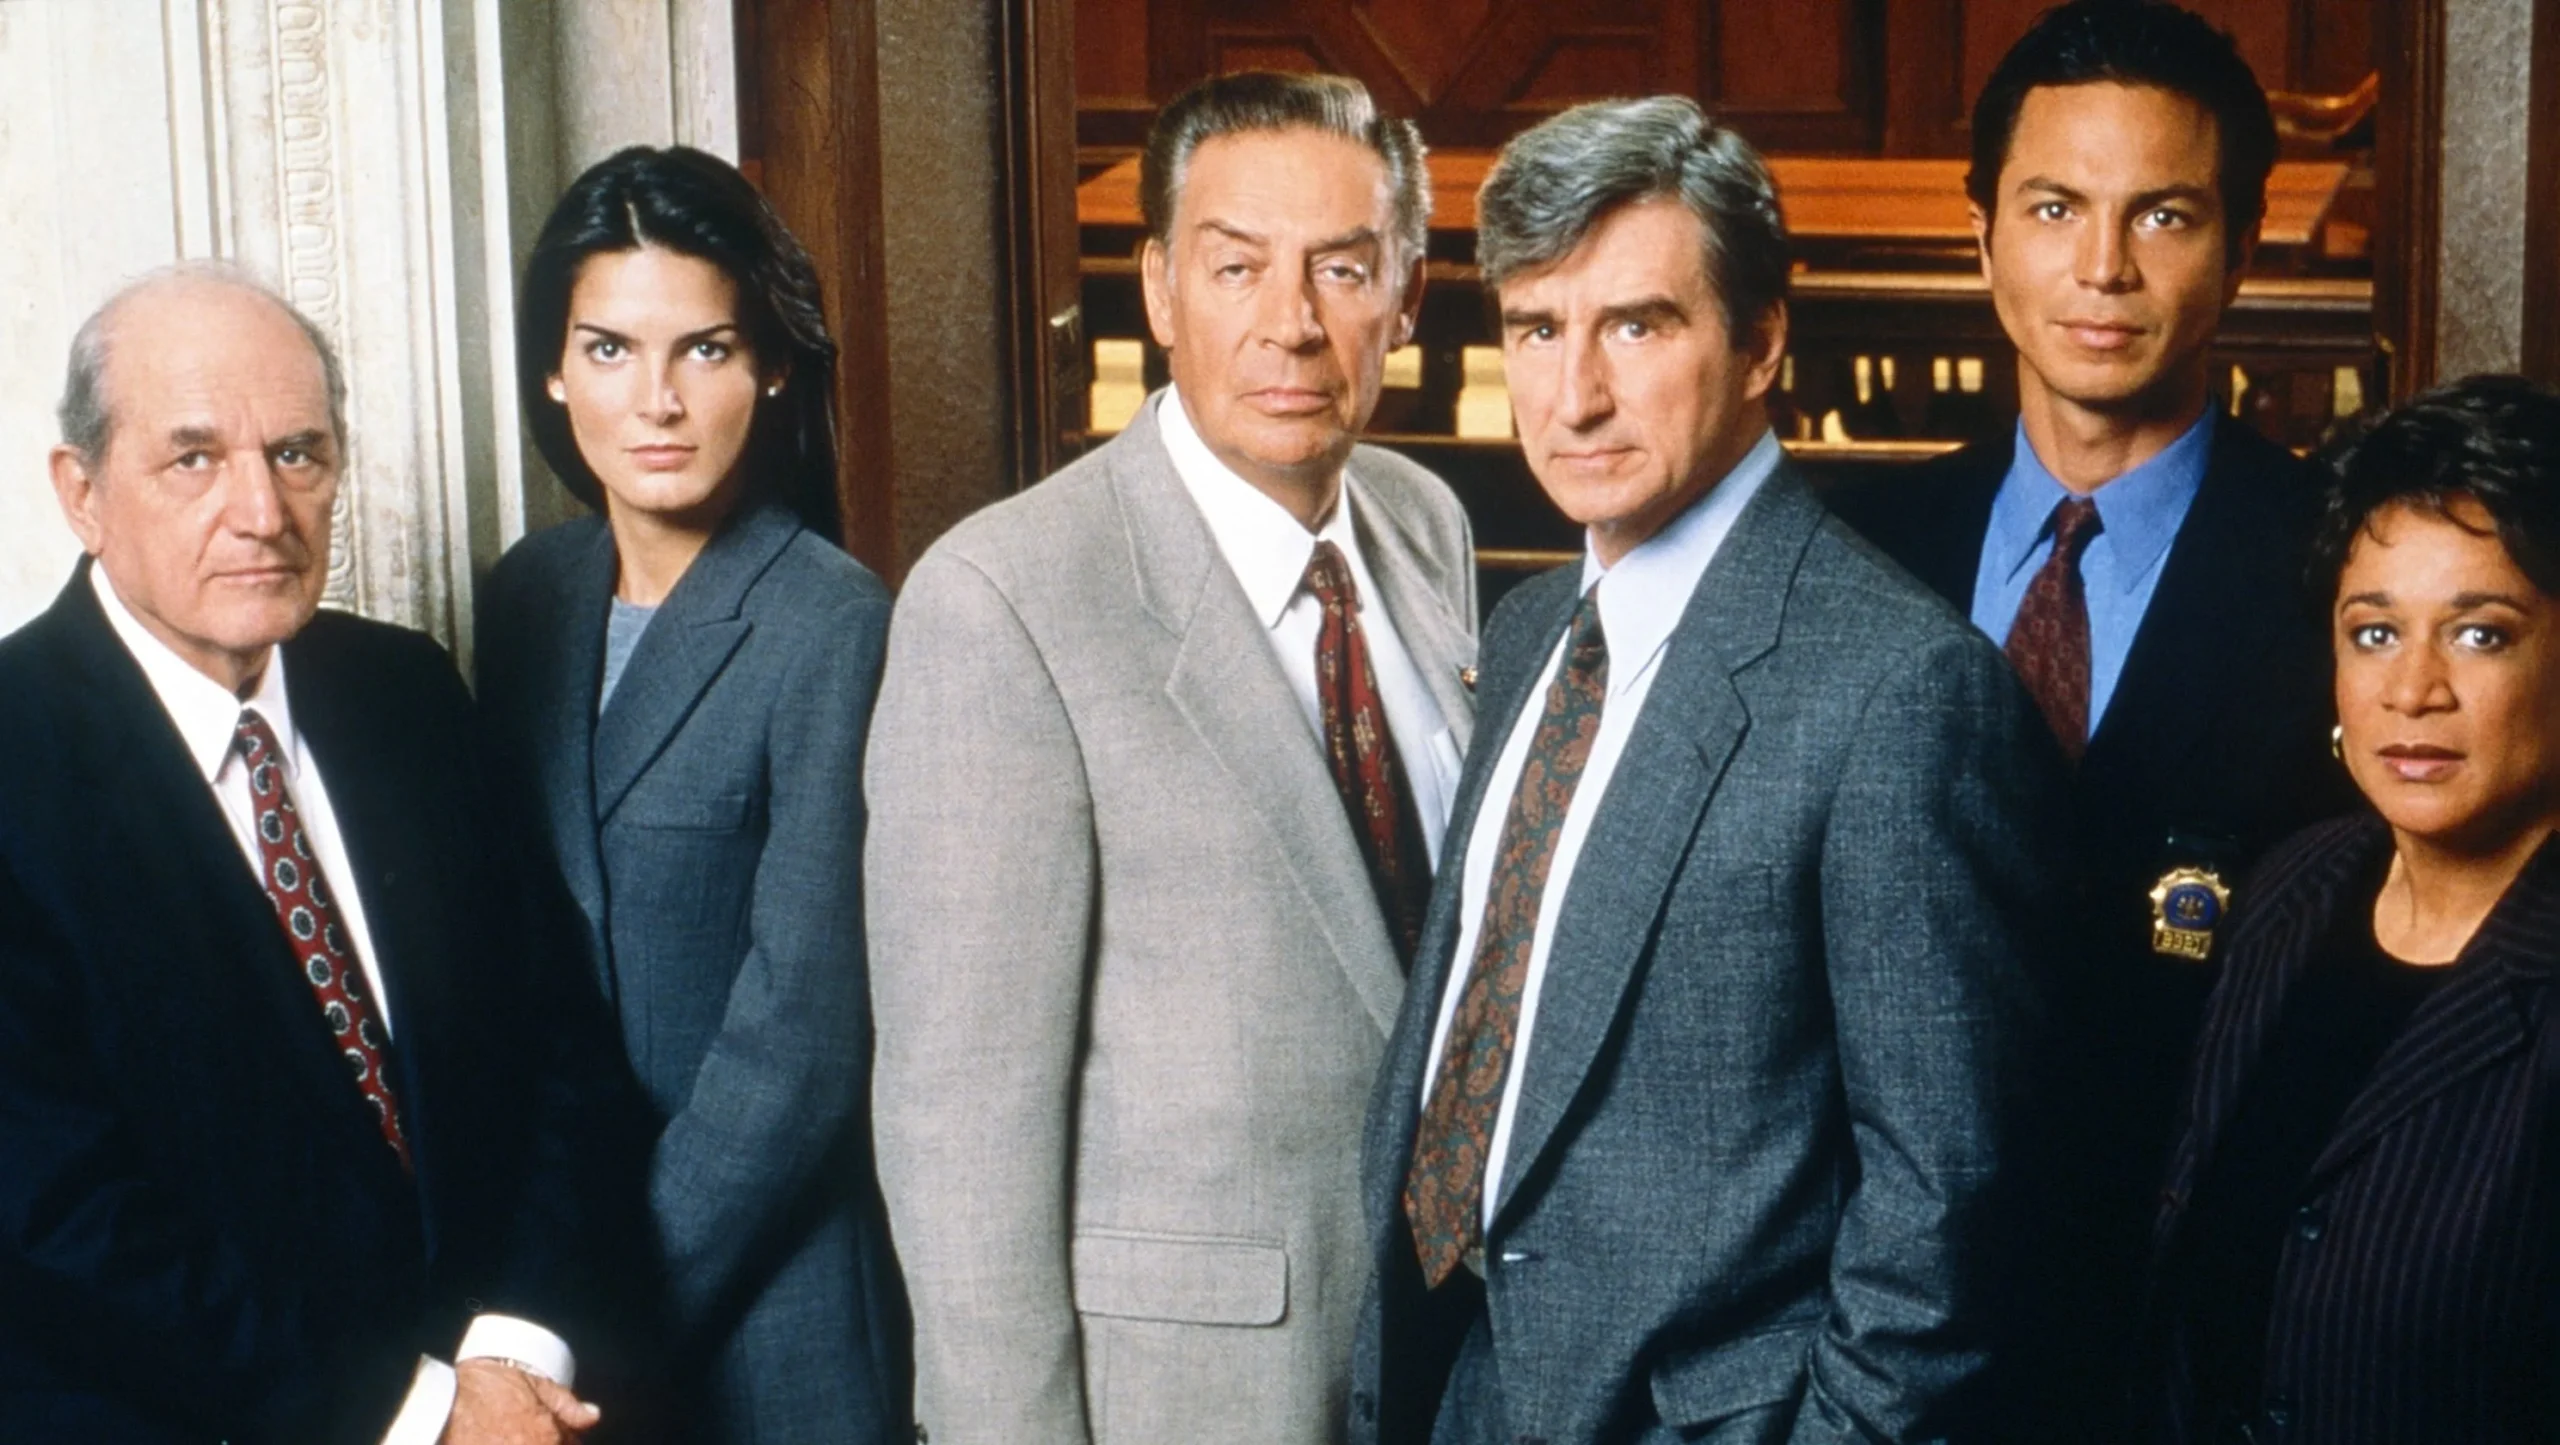 Law and Order Season 21: All You Need To Know